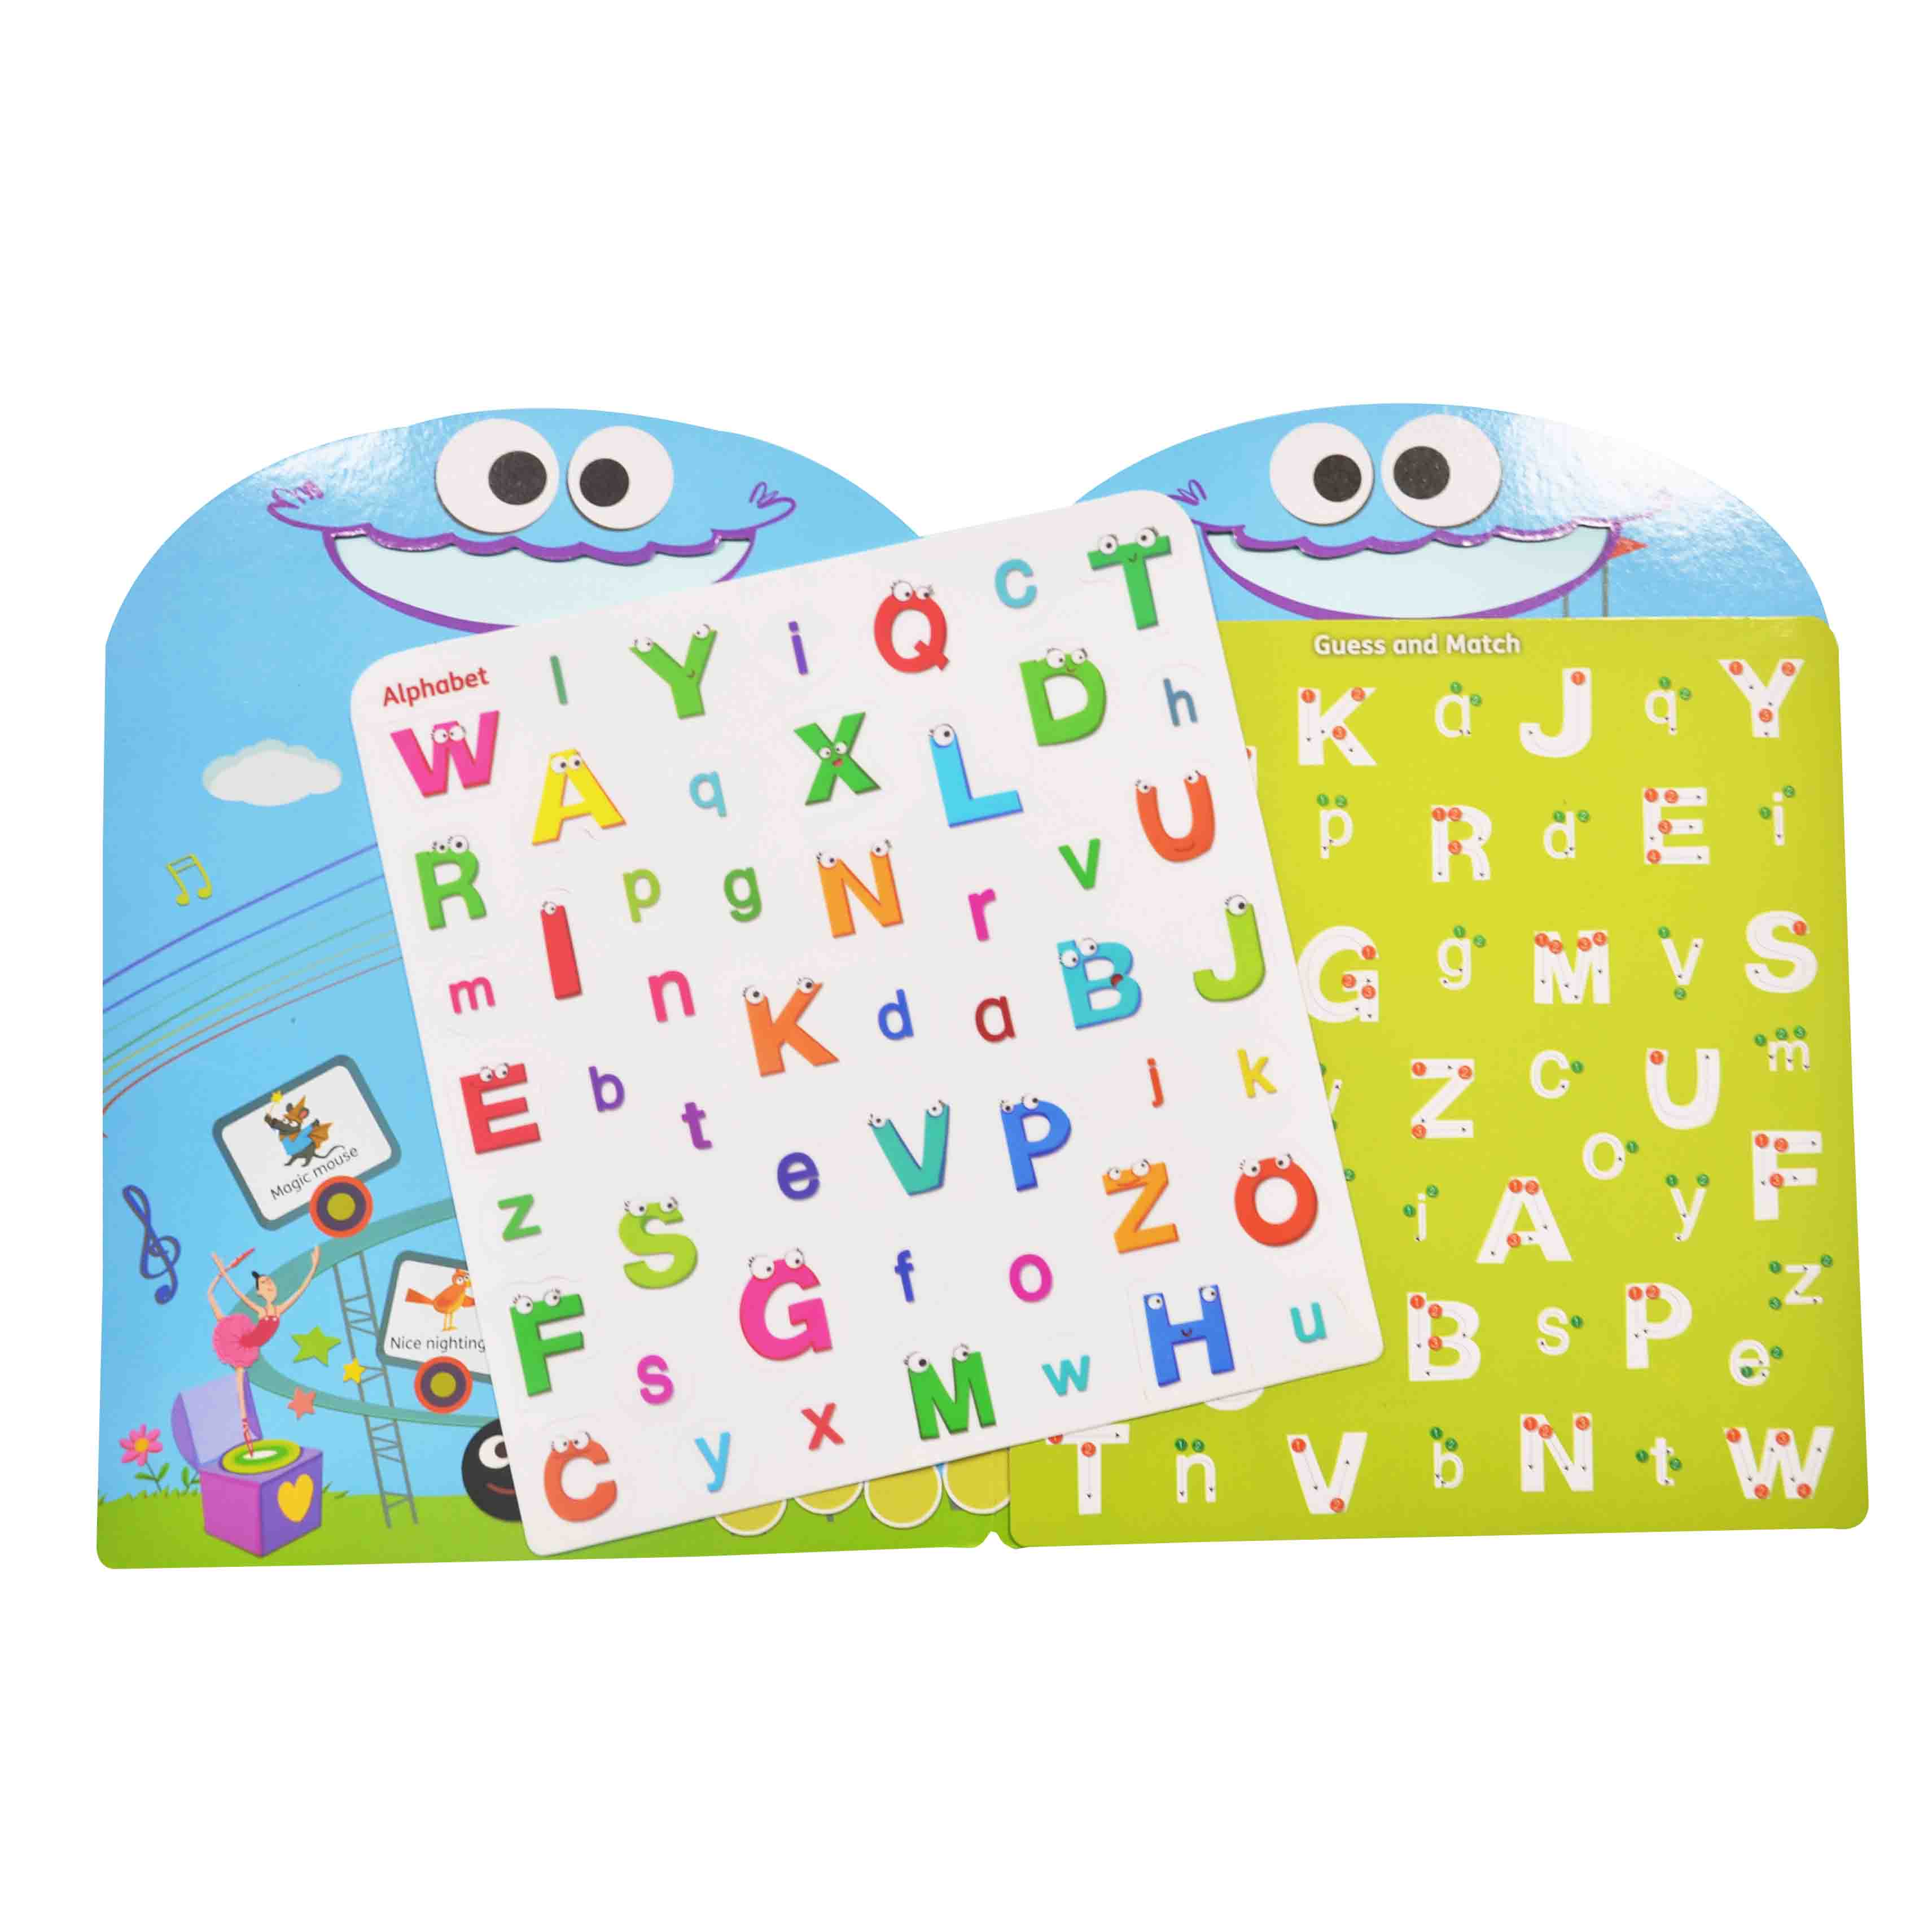 Play And Learn Alphabet Silicon Soft Sticker Sheet Washable and Reusable